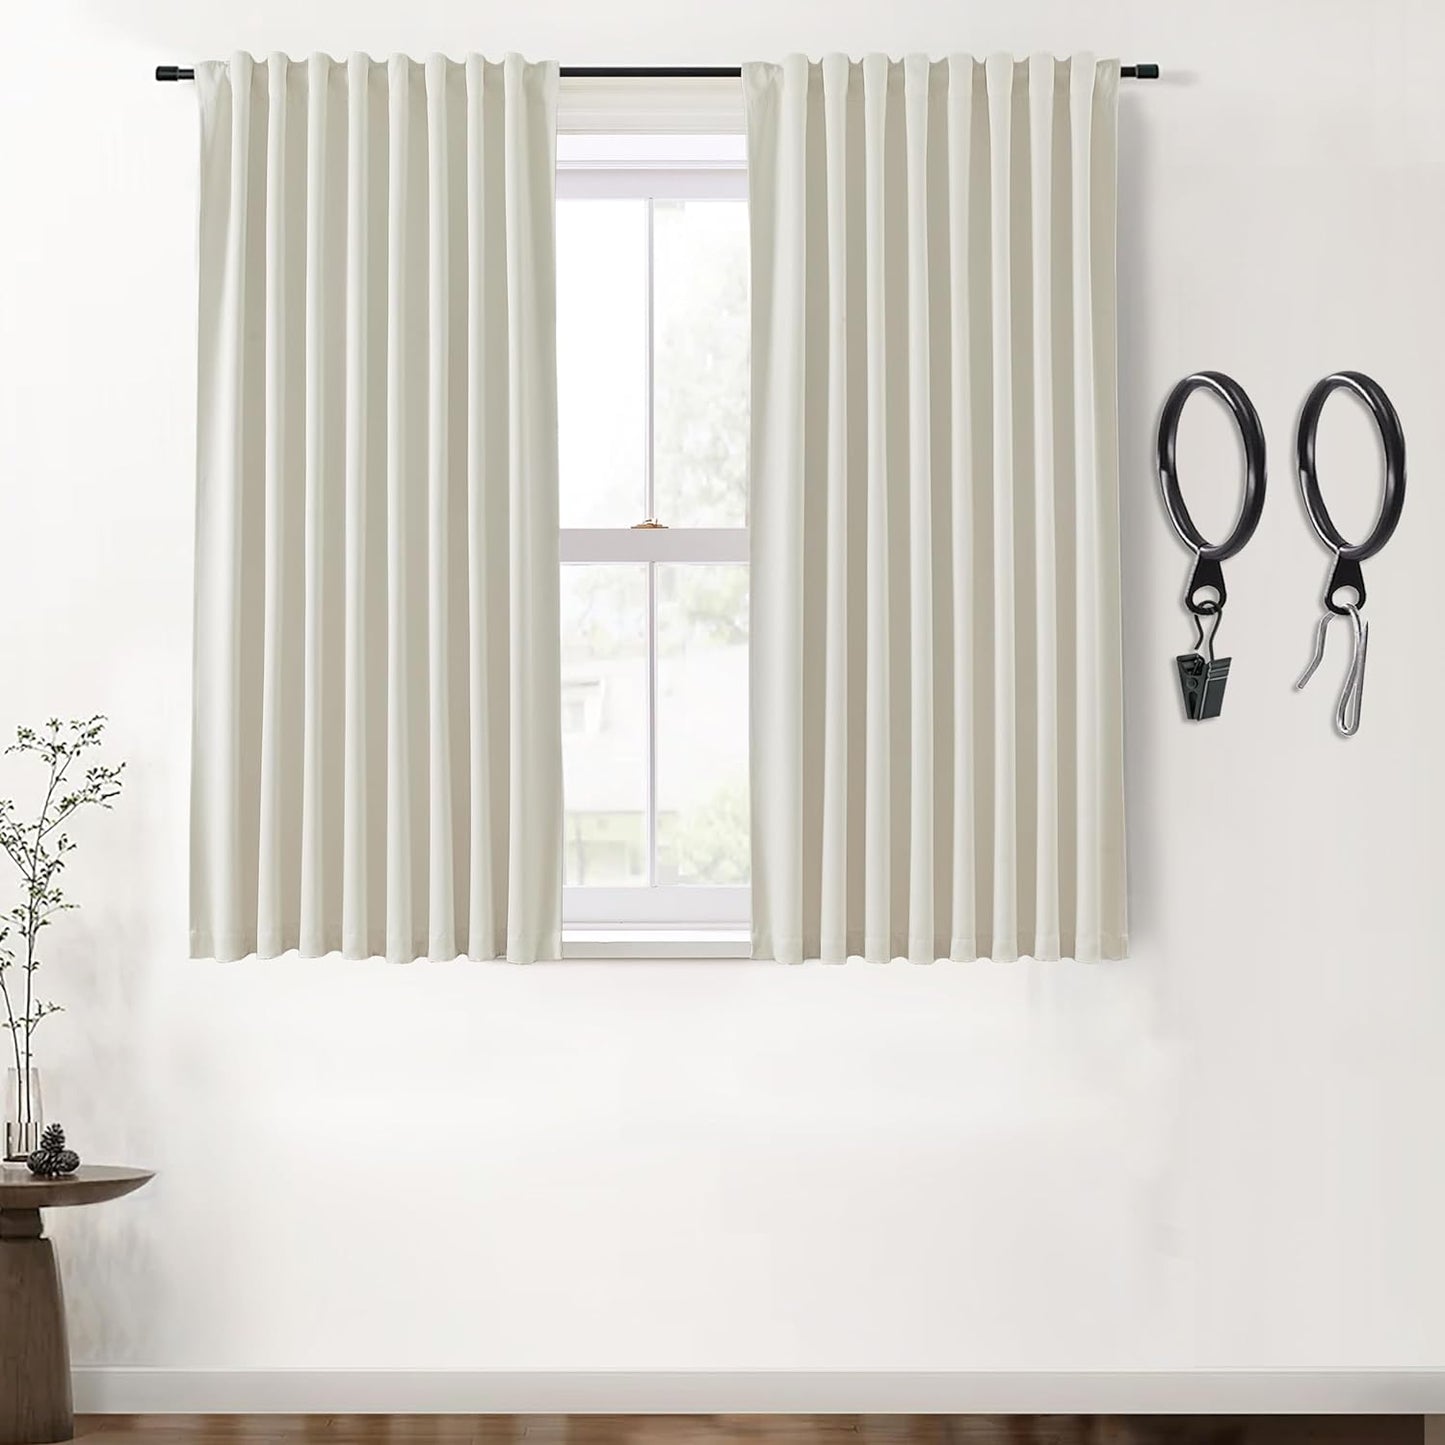 SHINELAND Beige Room Darkening Curtains 105 Inches Long for Living Room Bedroom,Cortinas Para Cuarto Bloqueador De Luz,Thermal Insulated Back Tab Pleat Blackout Curtains for Sunroom Patio Door Indoor  SHINELAND Cream 2X(52"Wx45"L) 